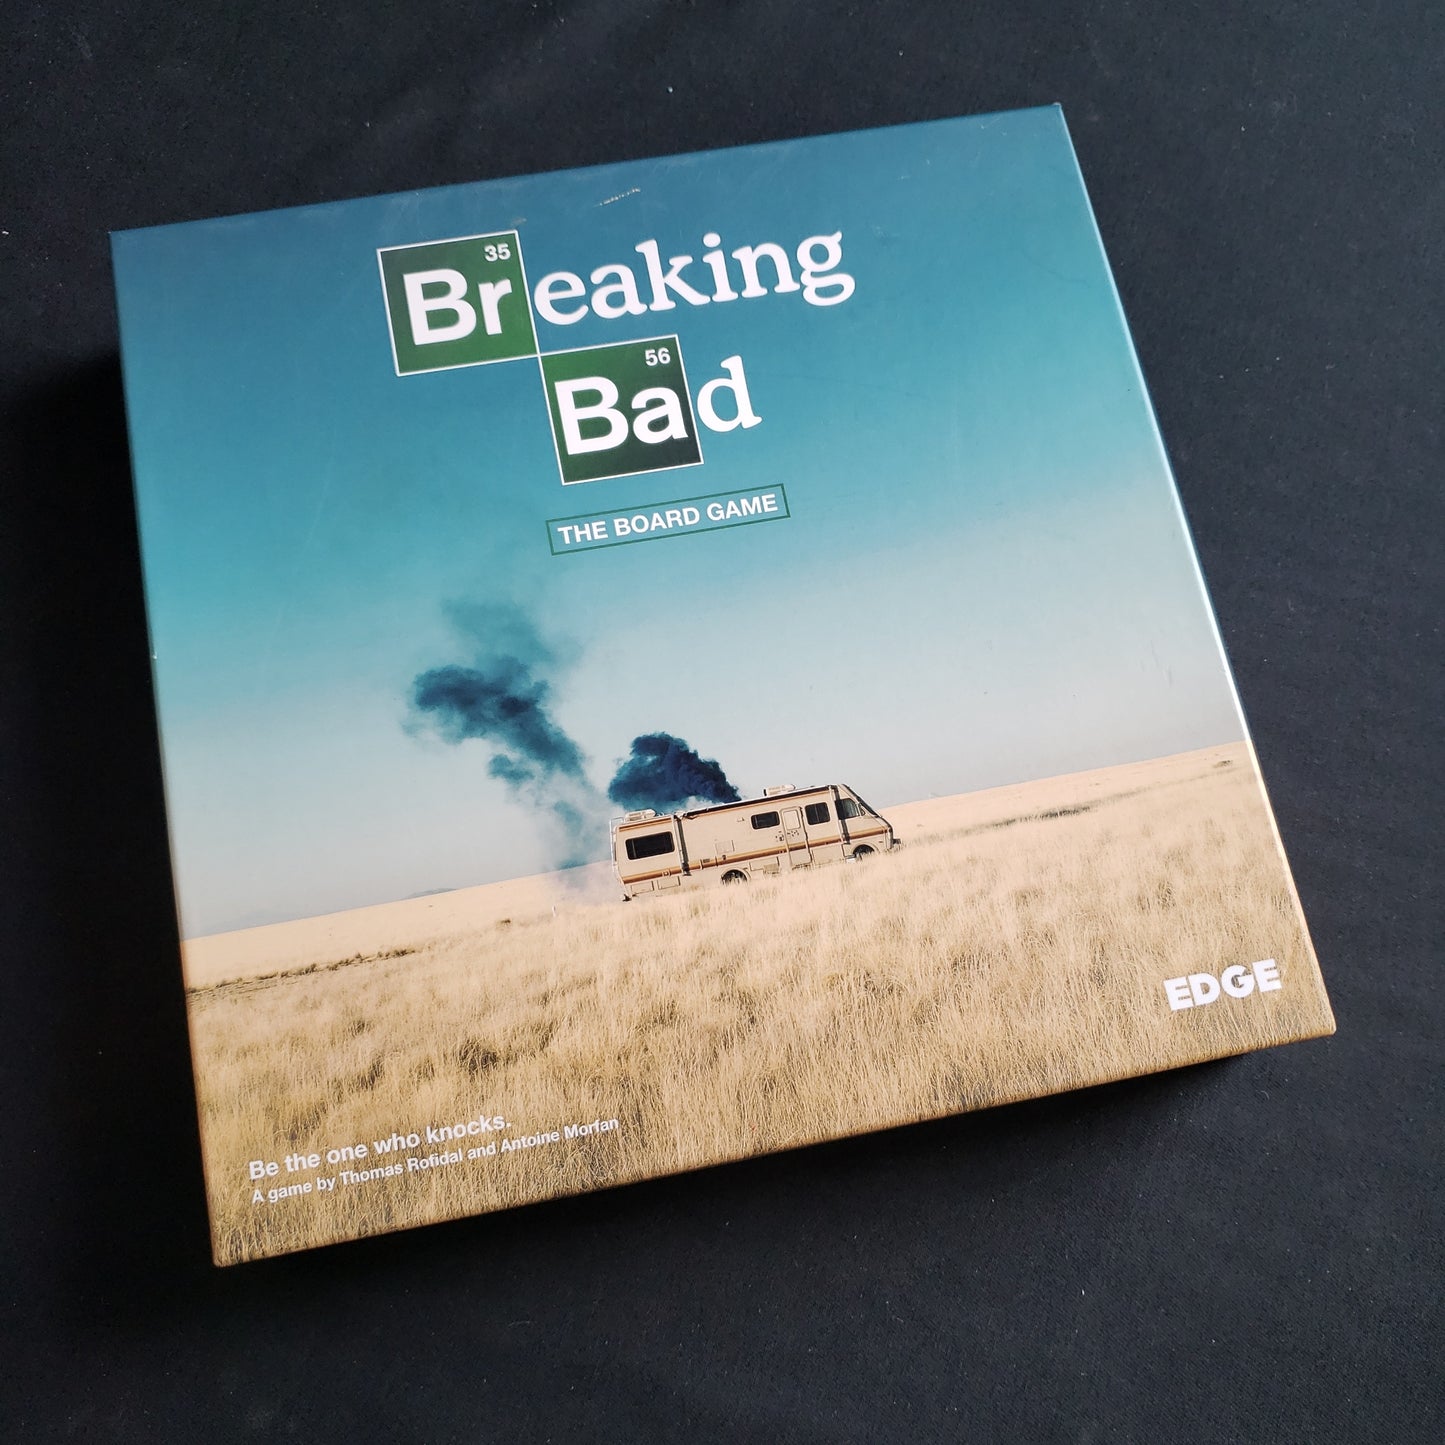 Image shows the front cover of the box of the Breaking Bad board game